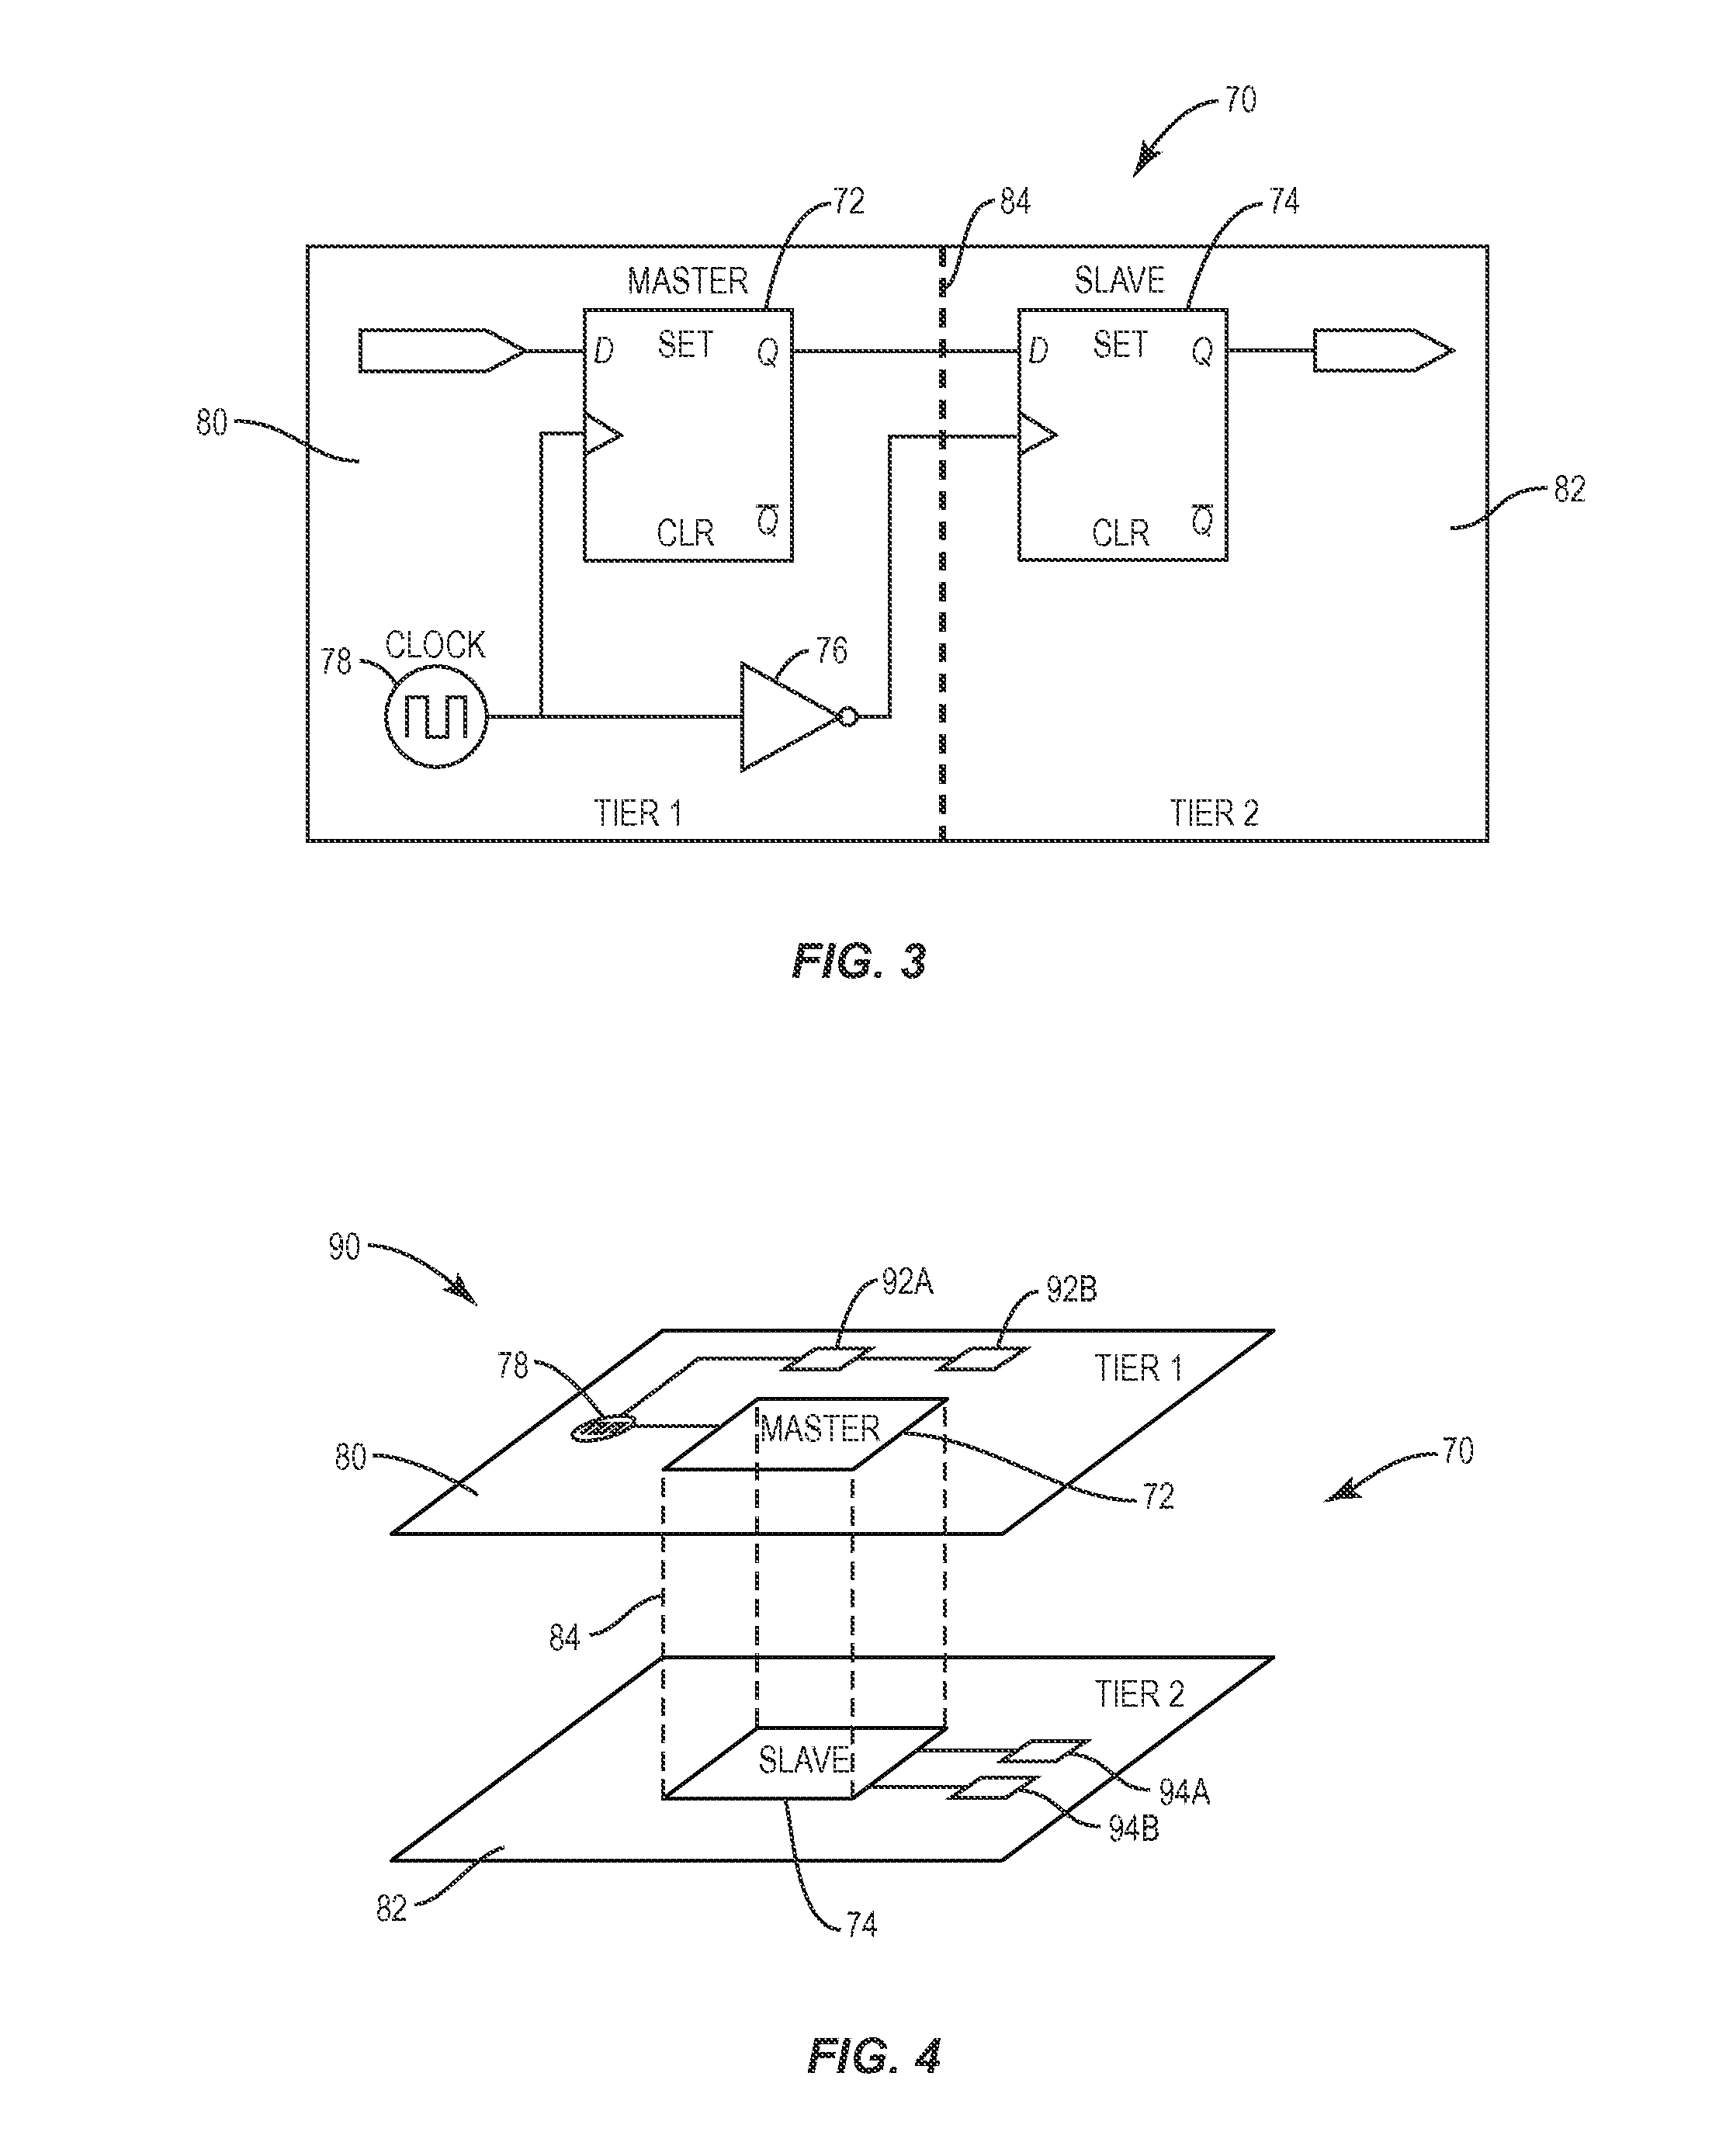 Flip-flops in a monolithic three-dimensional (3D) integrated circuit (IC) (3DIC) and related methods